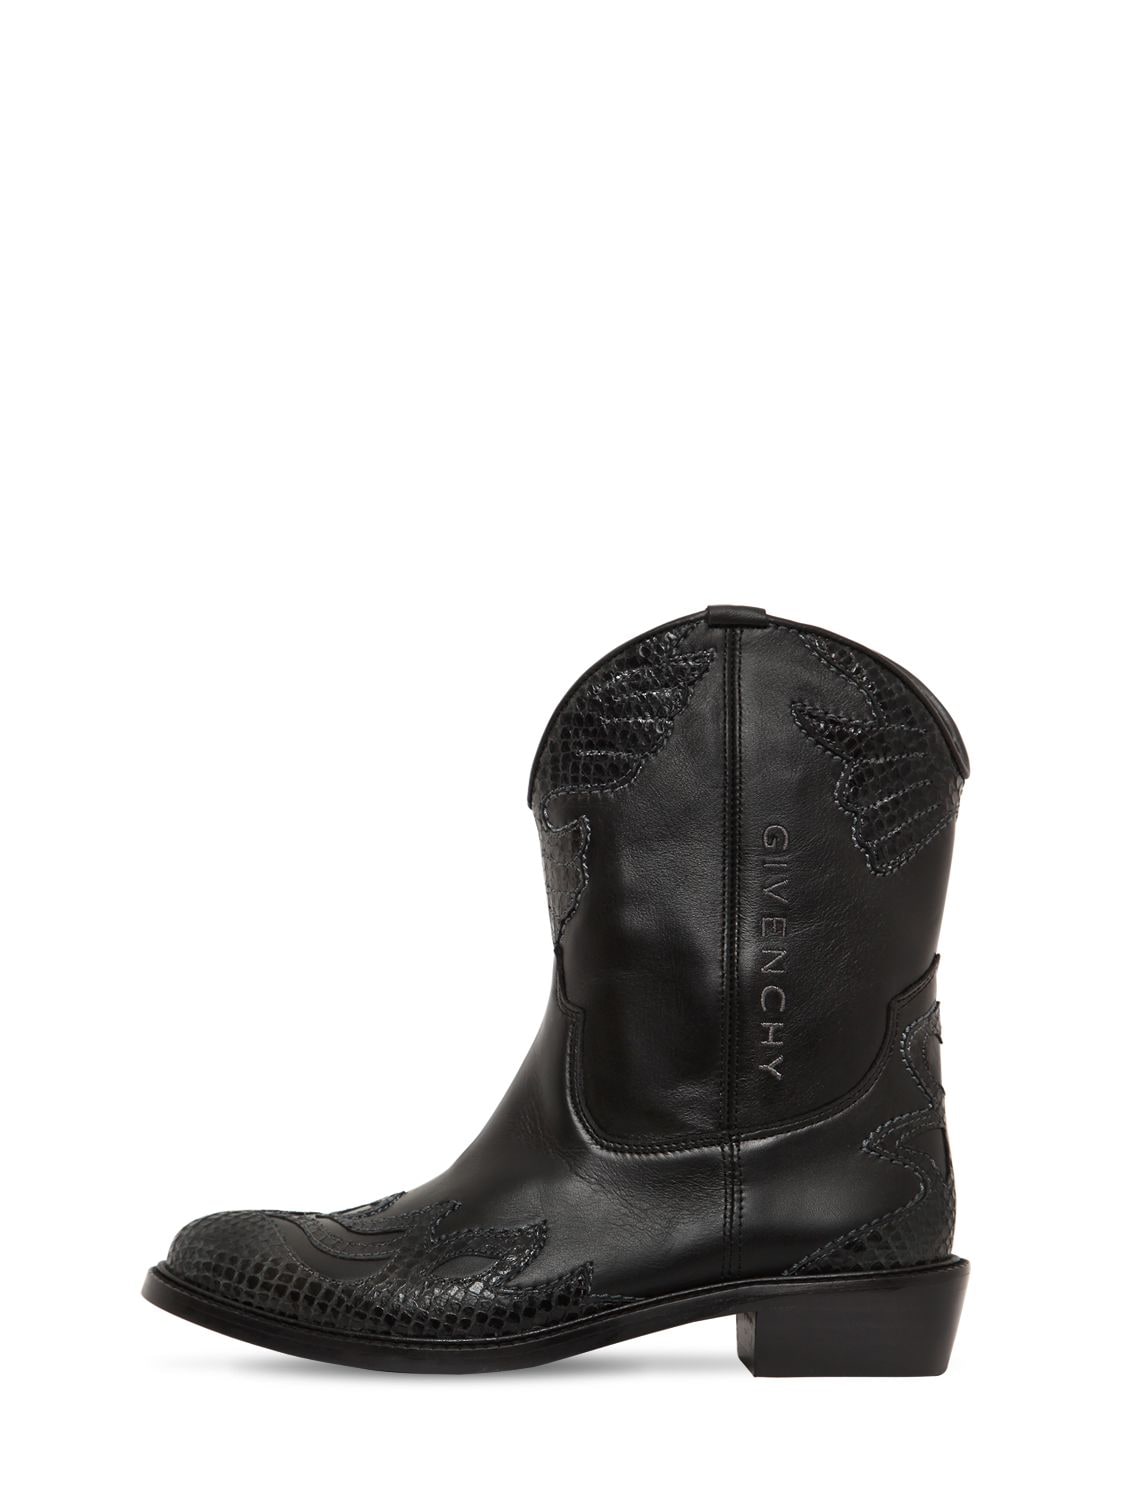 GIVENCHY TEXAS EMBROIDERED LEATHER BOOTS,70IOFK076-MDLC0